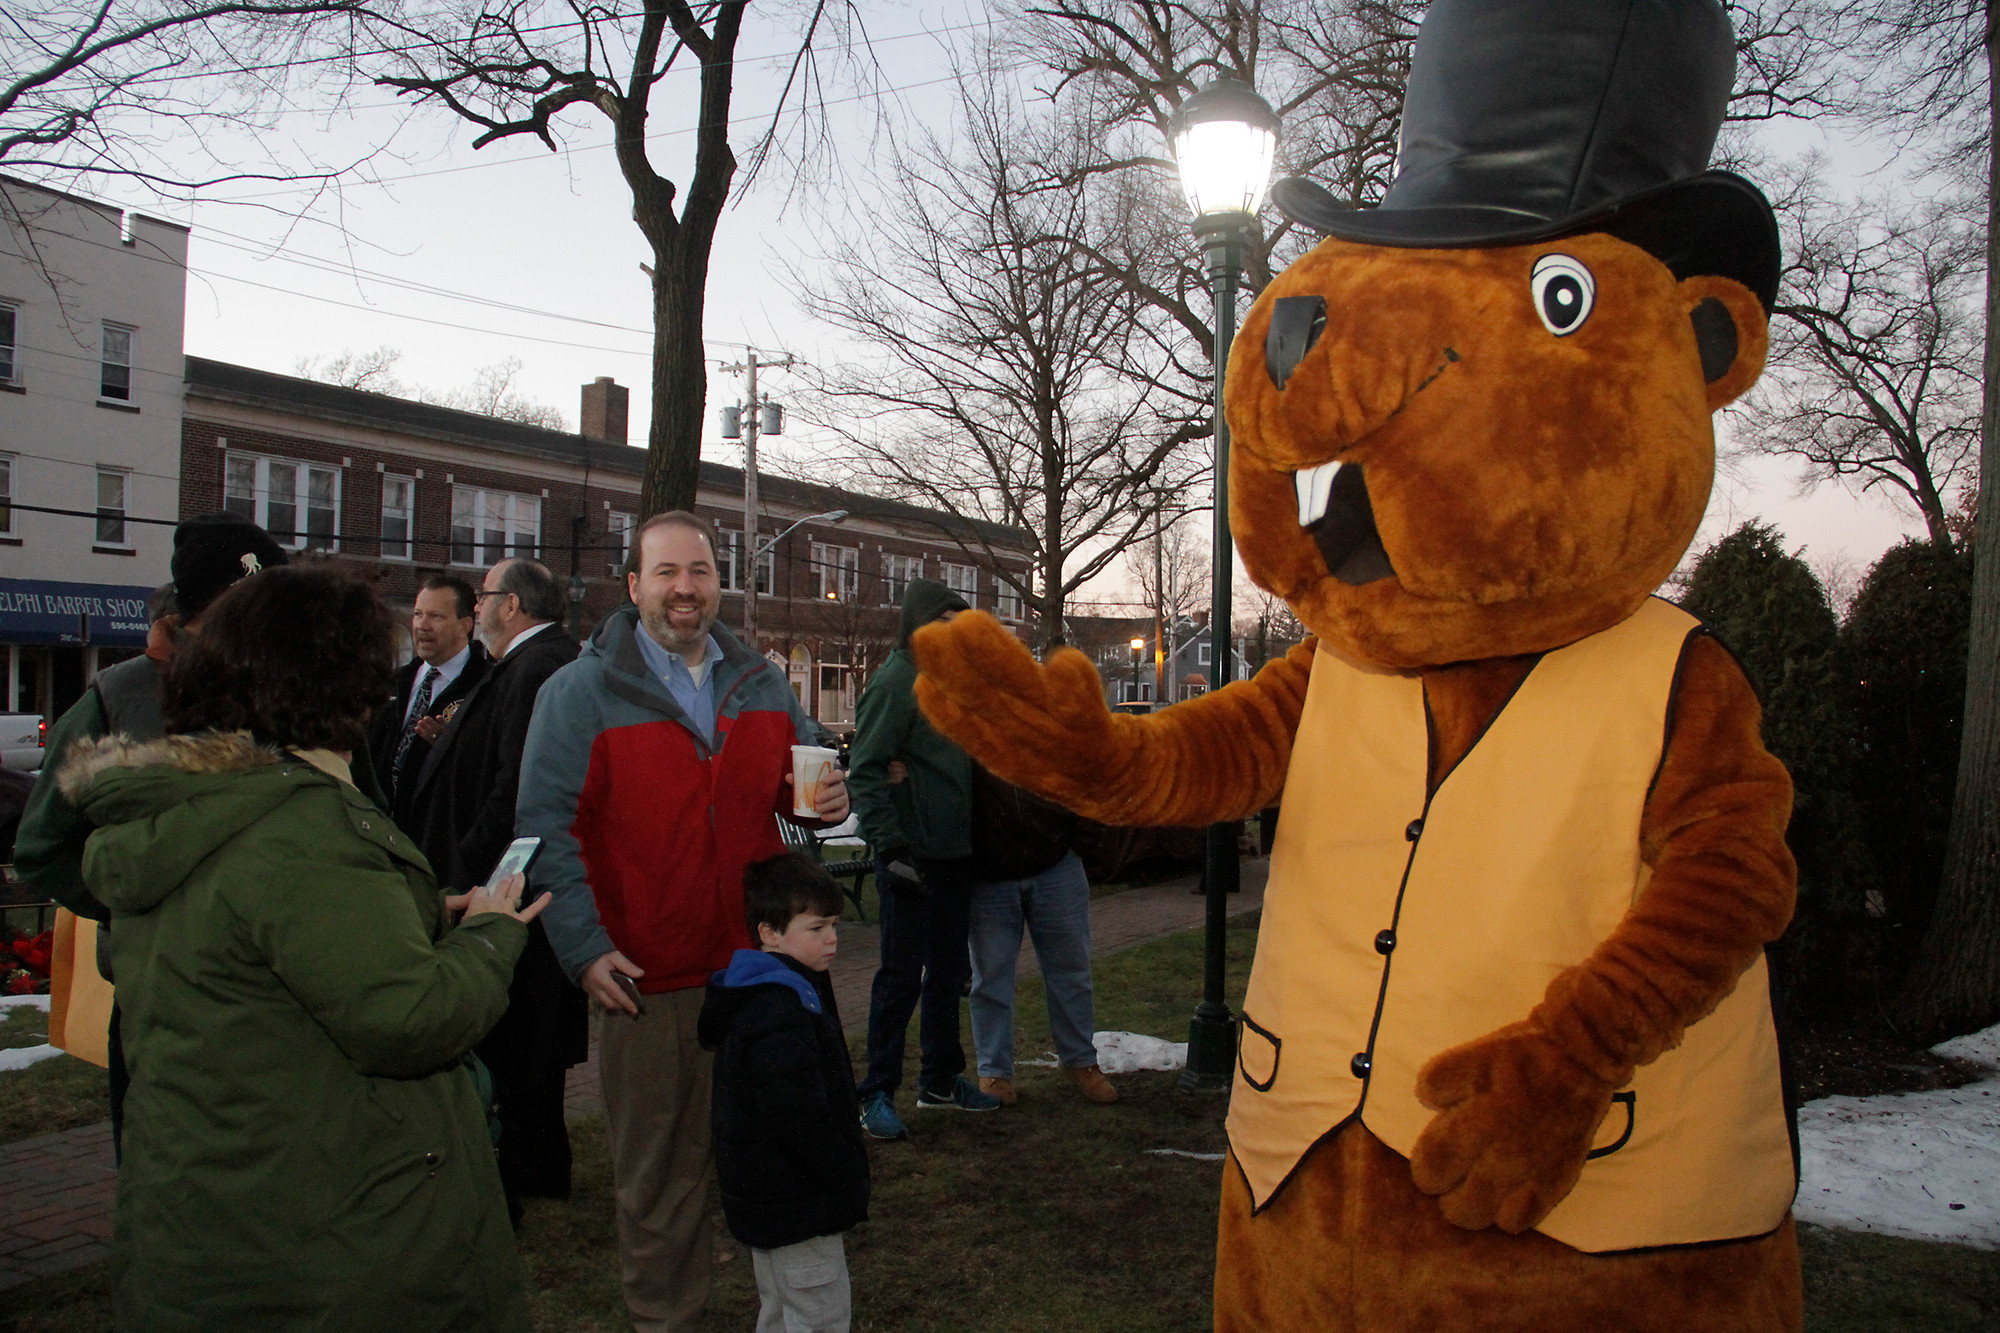 Peter Robideau, in a larger-than-life groundhog costume, waves to the crowd.